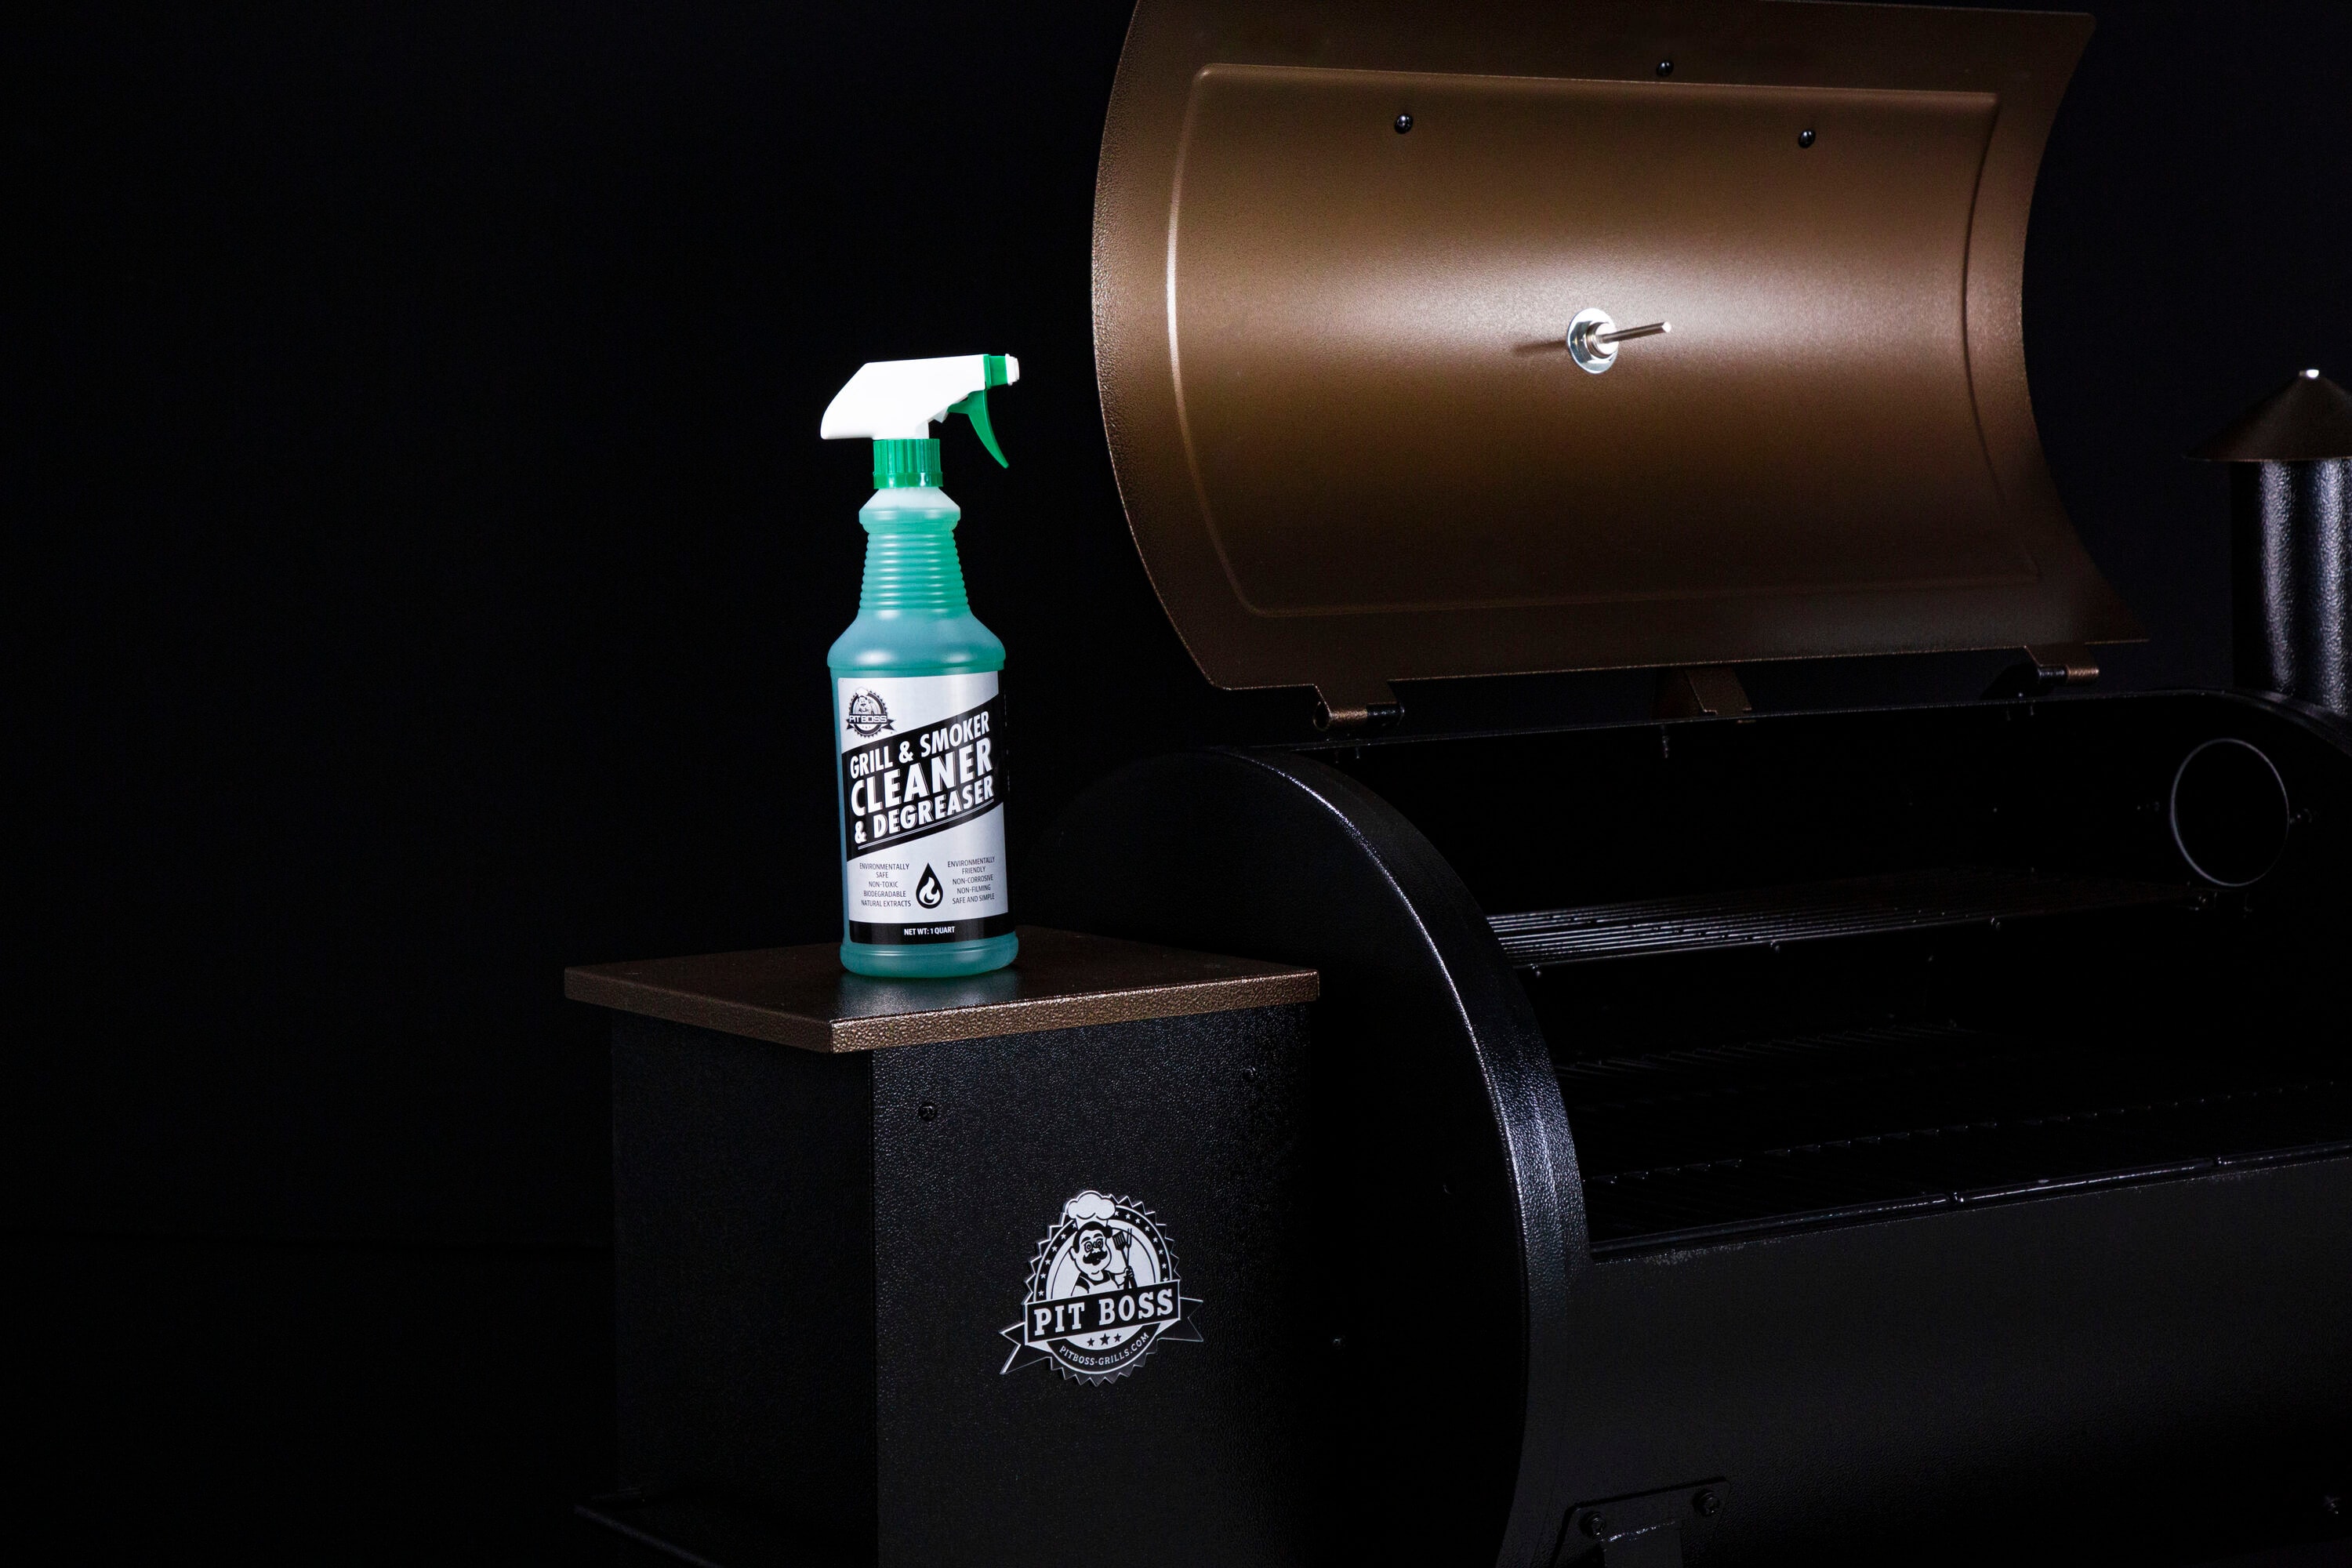 Pit Boss Grill and Smoker Cleaner and Degreaser Spray